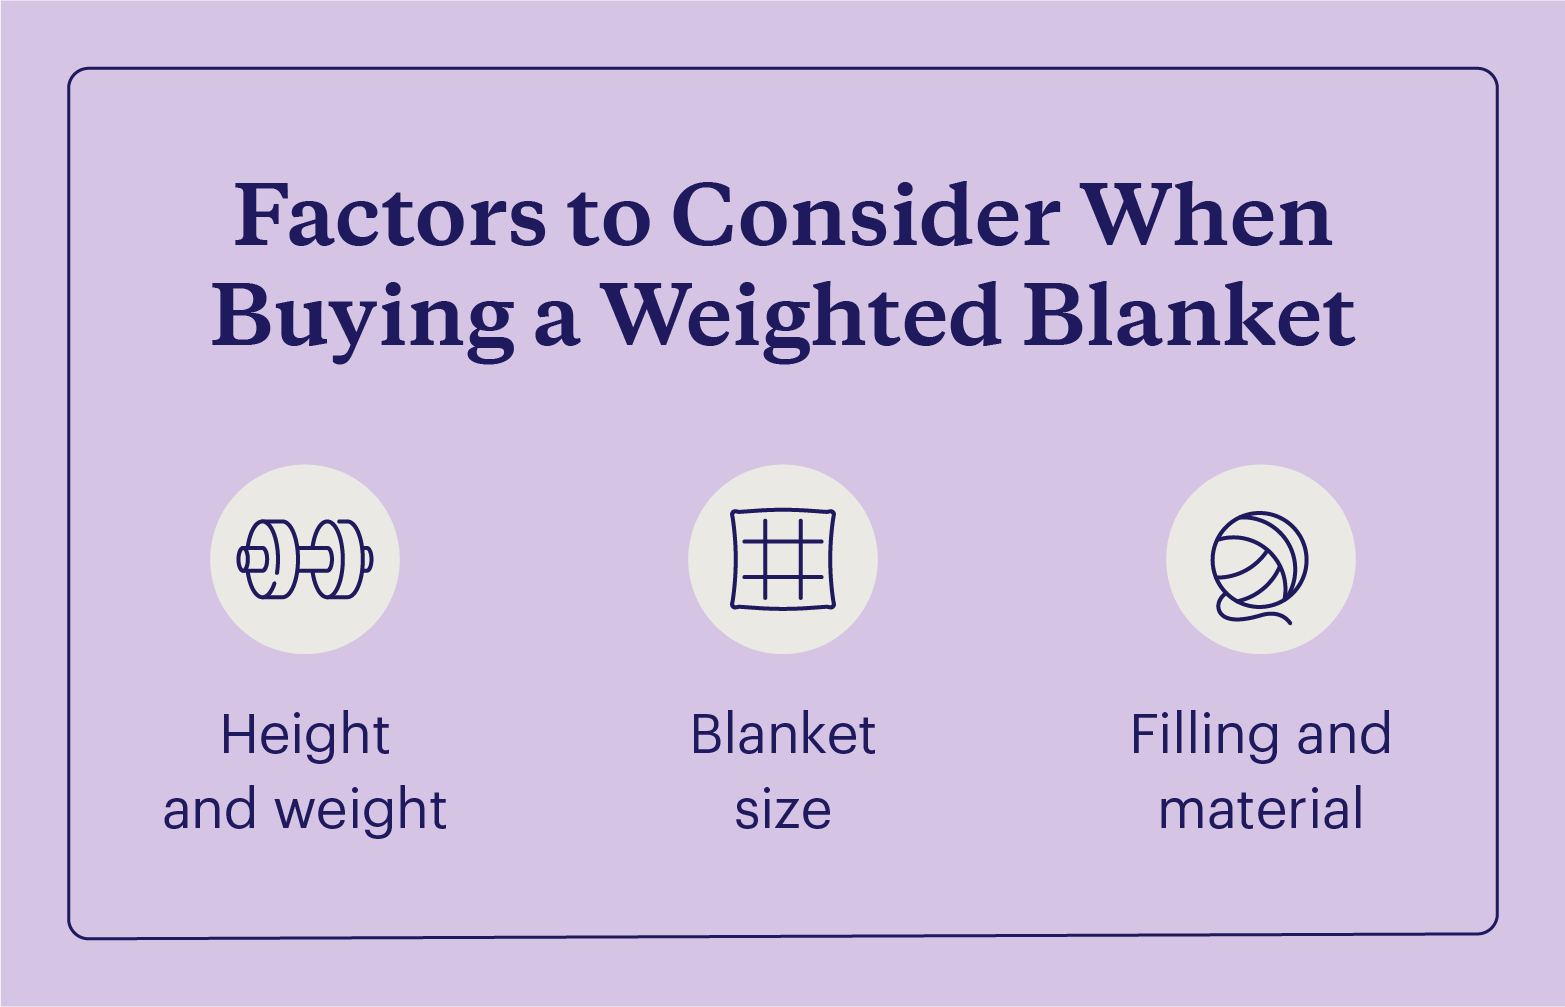 Graphic illustrating factors to consider when purchasing a weighted blanket.